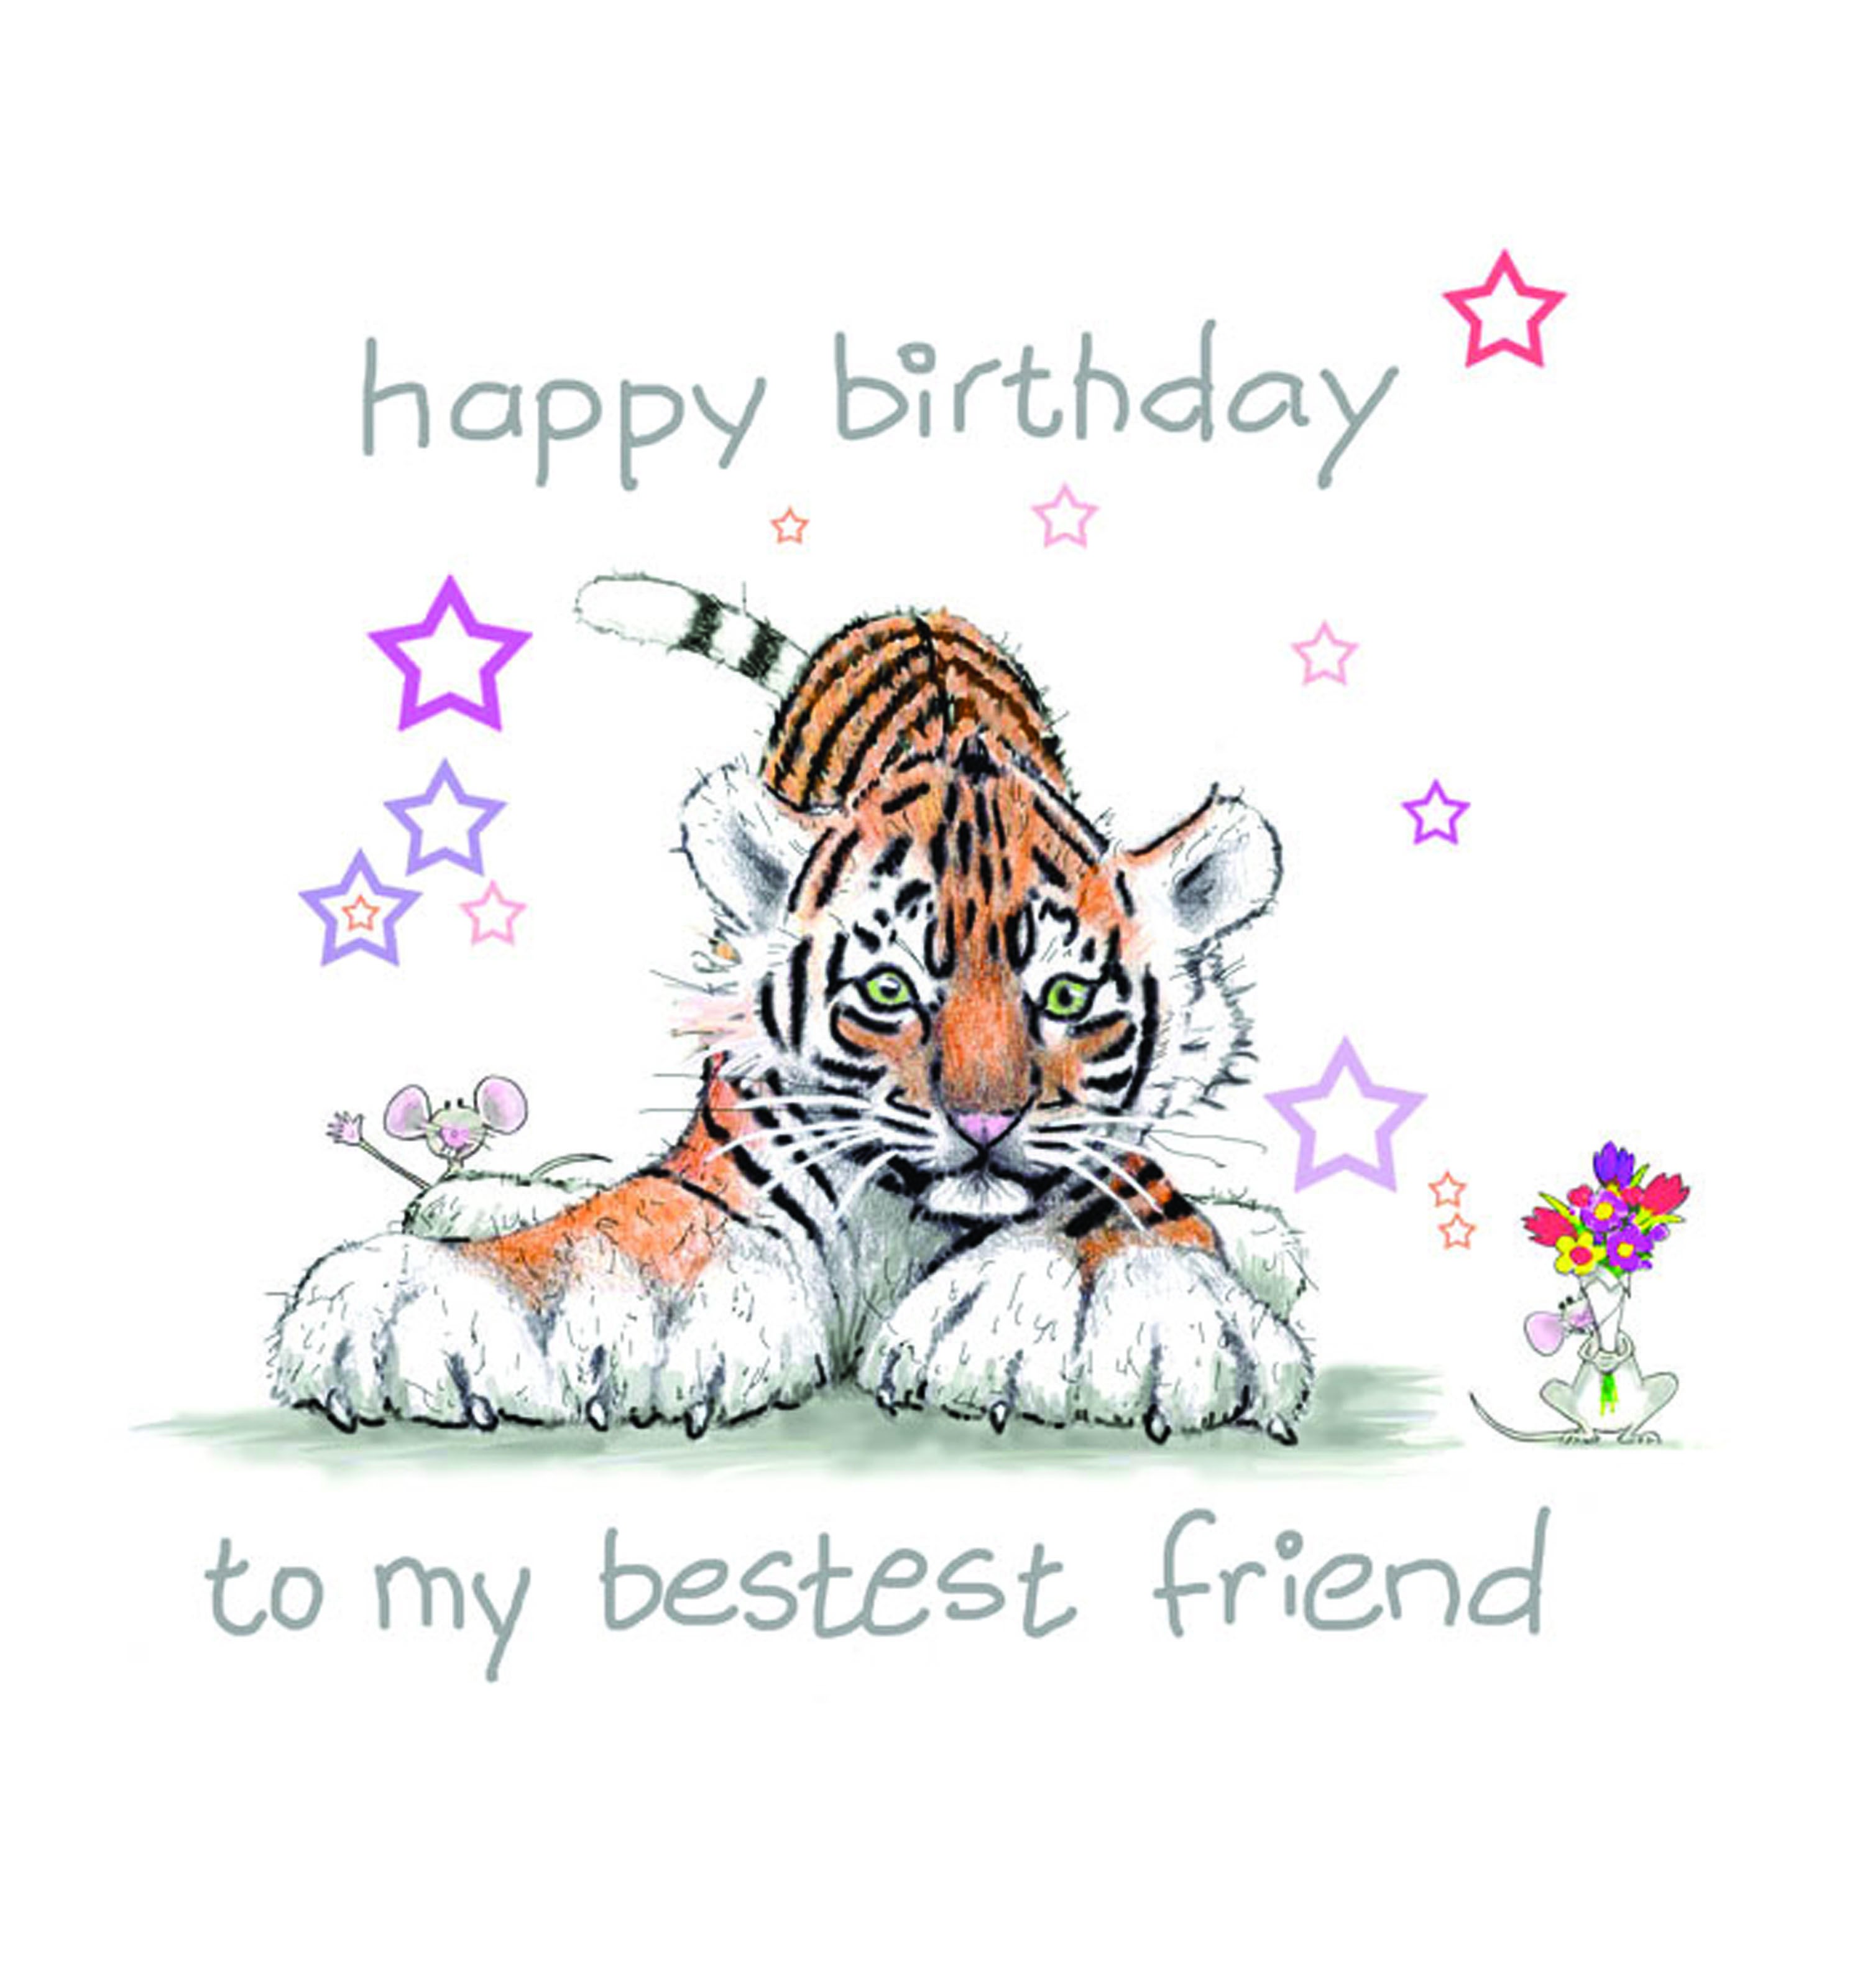 Tiger Papercraft Greetings From Phillip Allder Greeting & Stationery